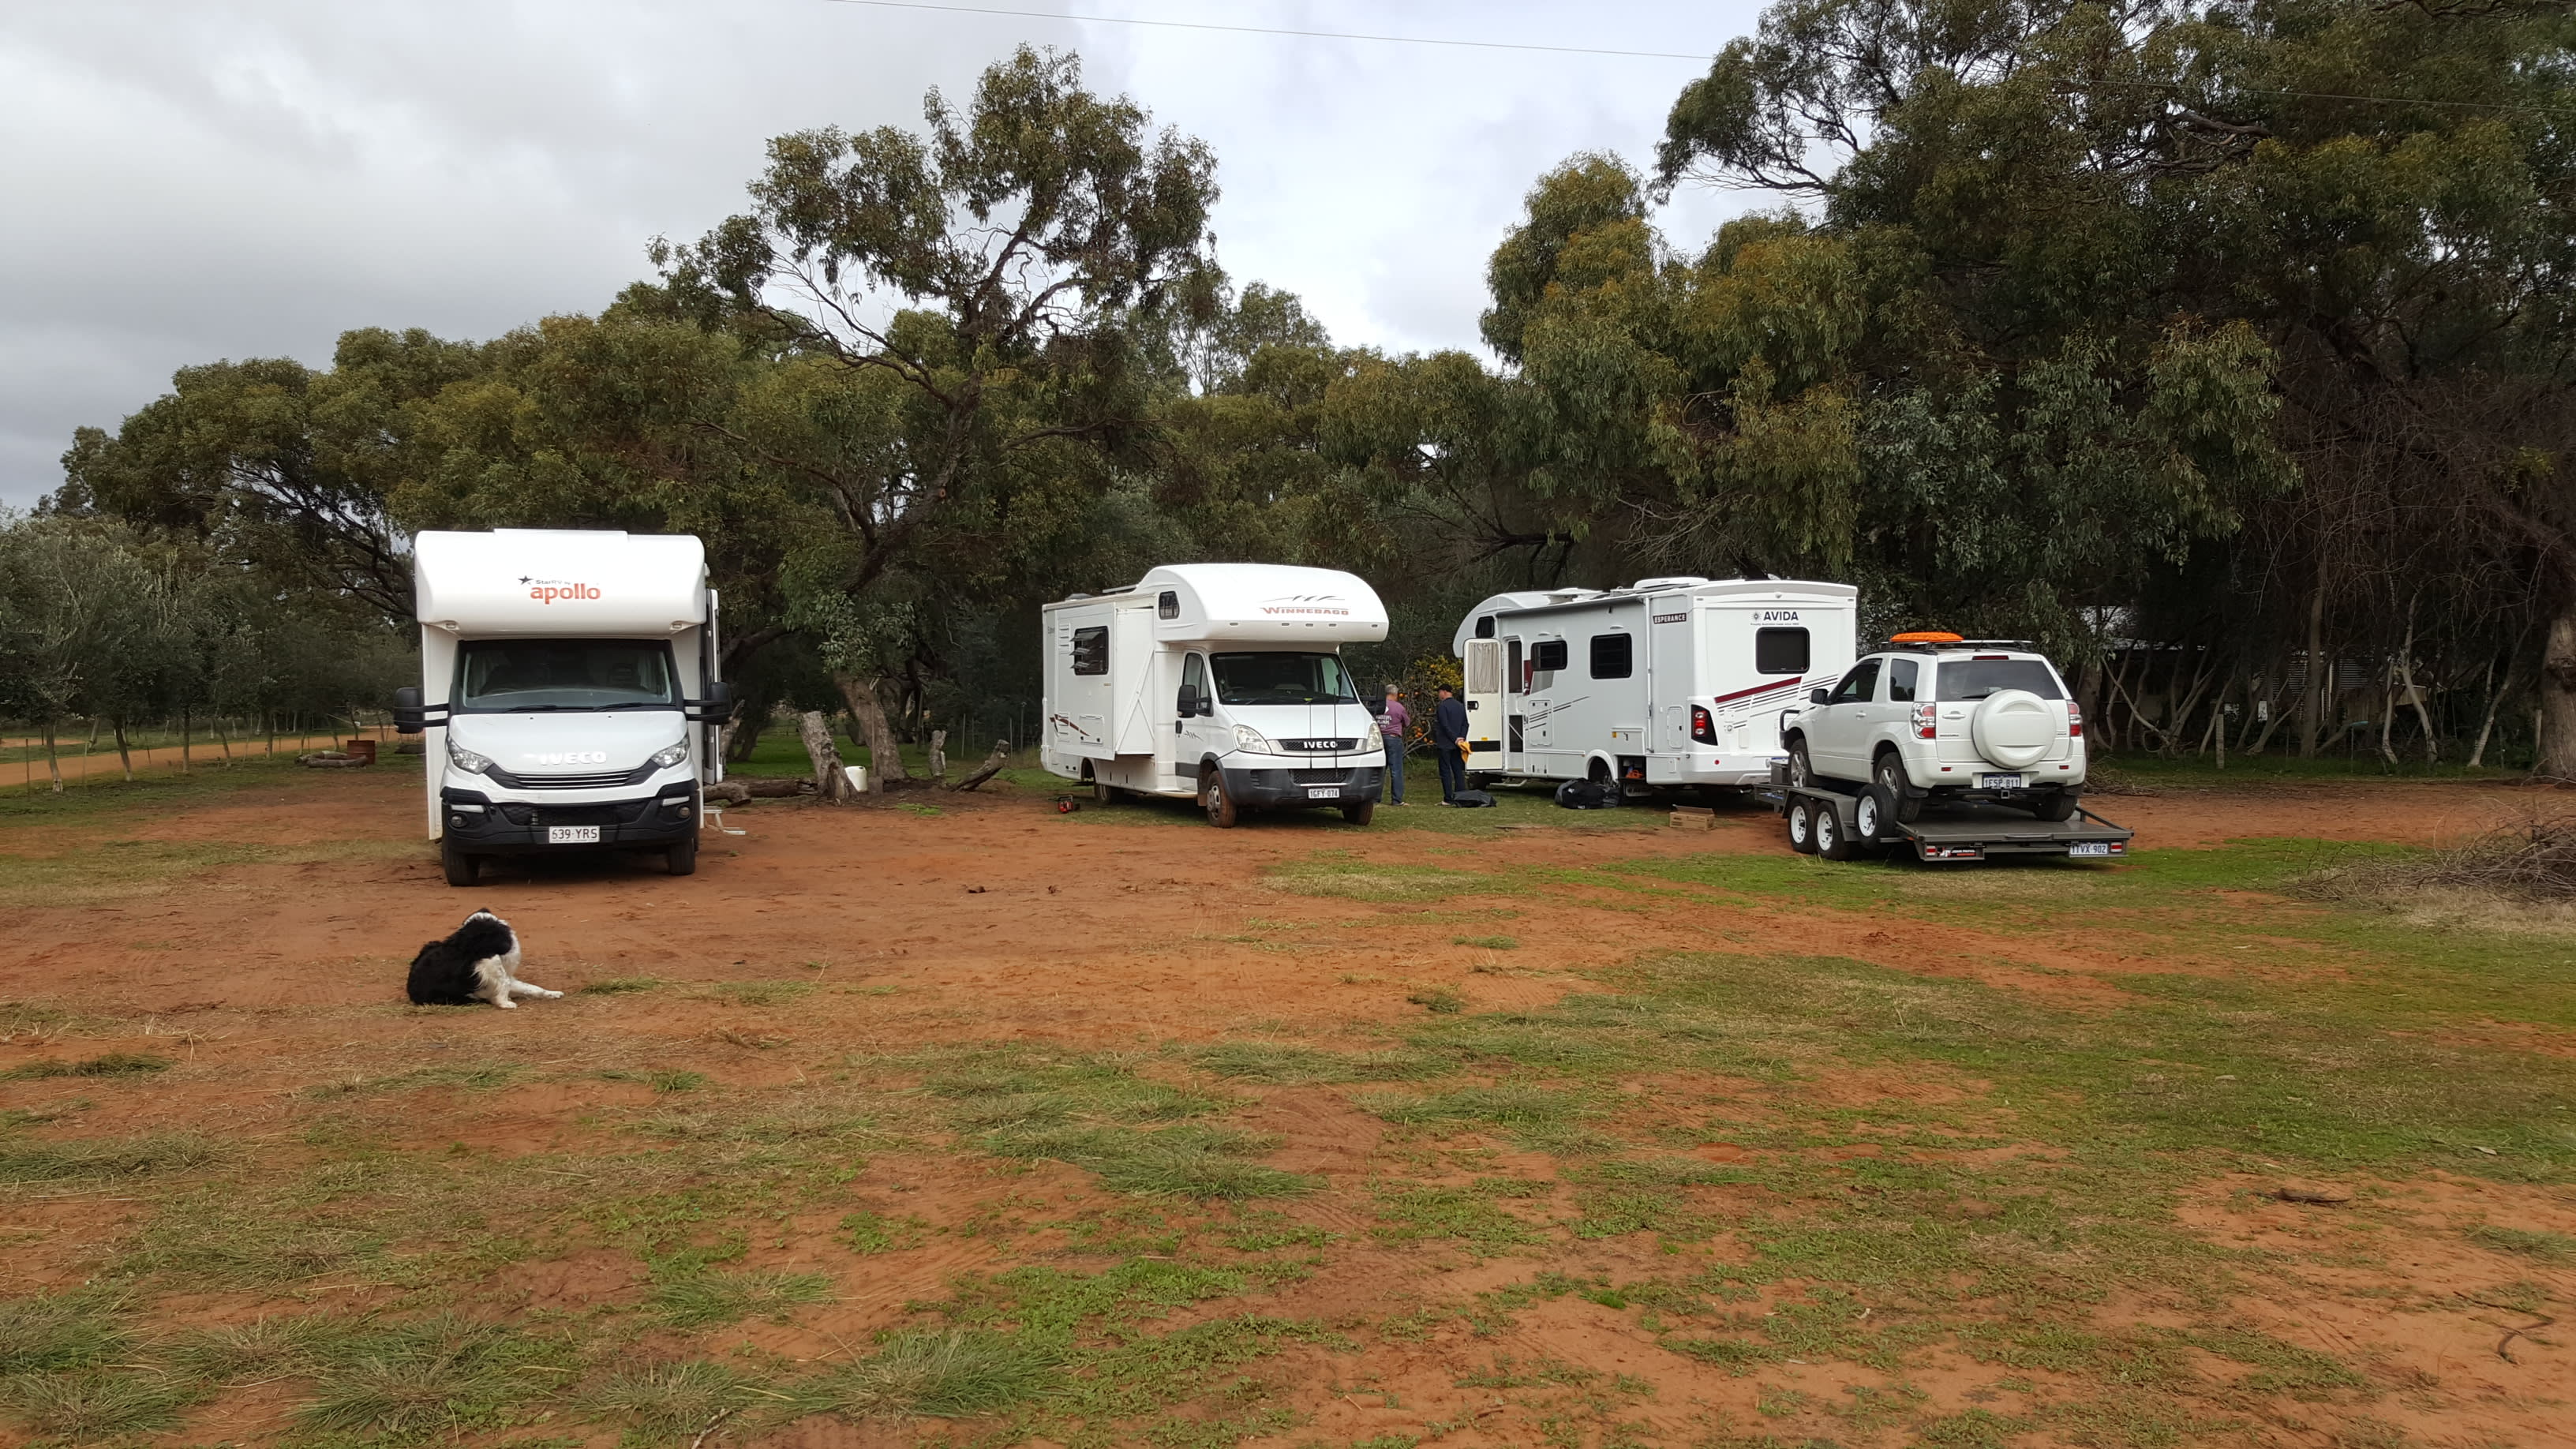 GREY FANTAIL has space for a group of motorhomes or large caravans.